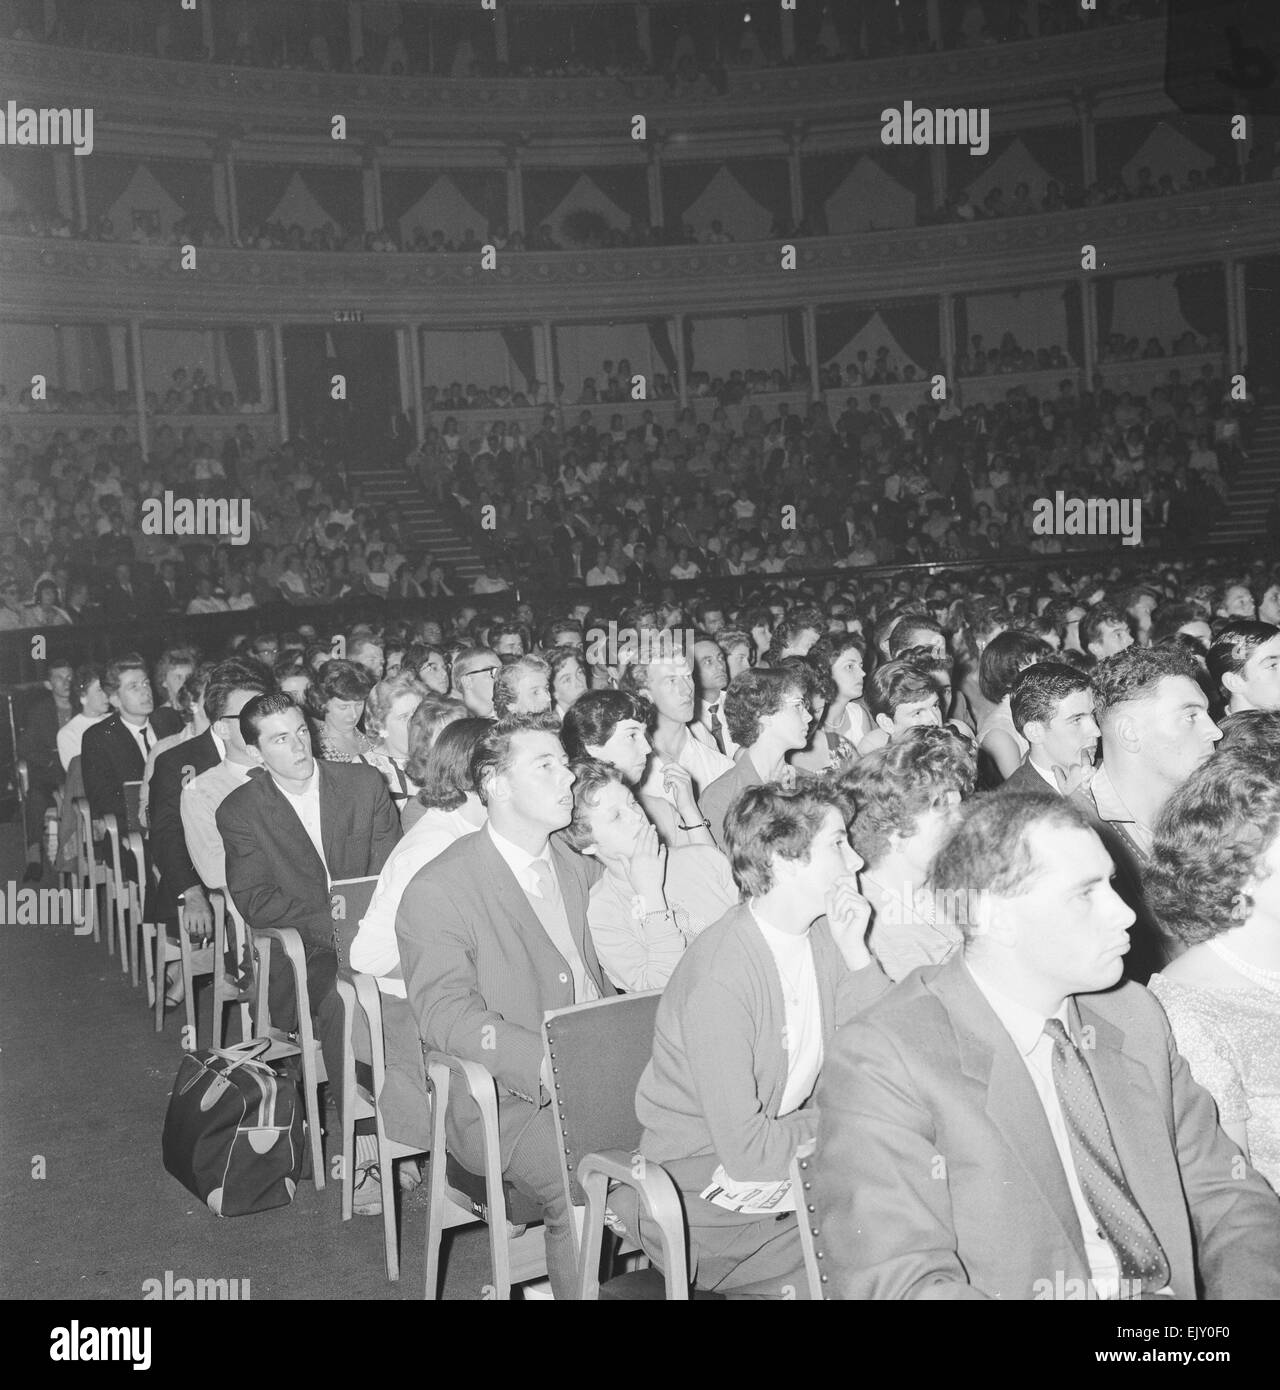 The Great Pop Prom 1959, held at the Royal Albert Hall on Sunday 20th September 1959.    A.k.a.   The Marilyn Roxy Valentine Great Pop Prom Stock Photo